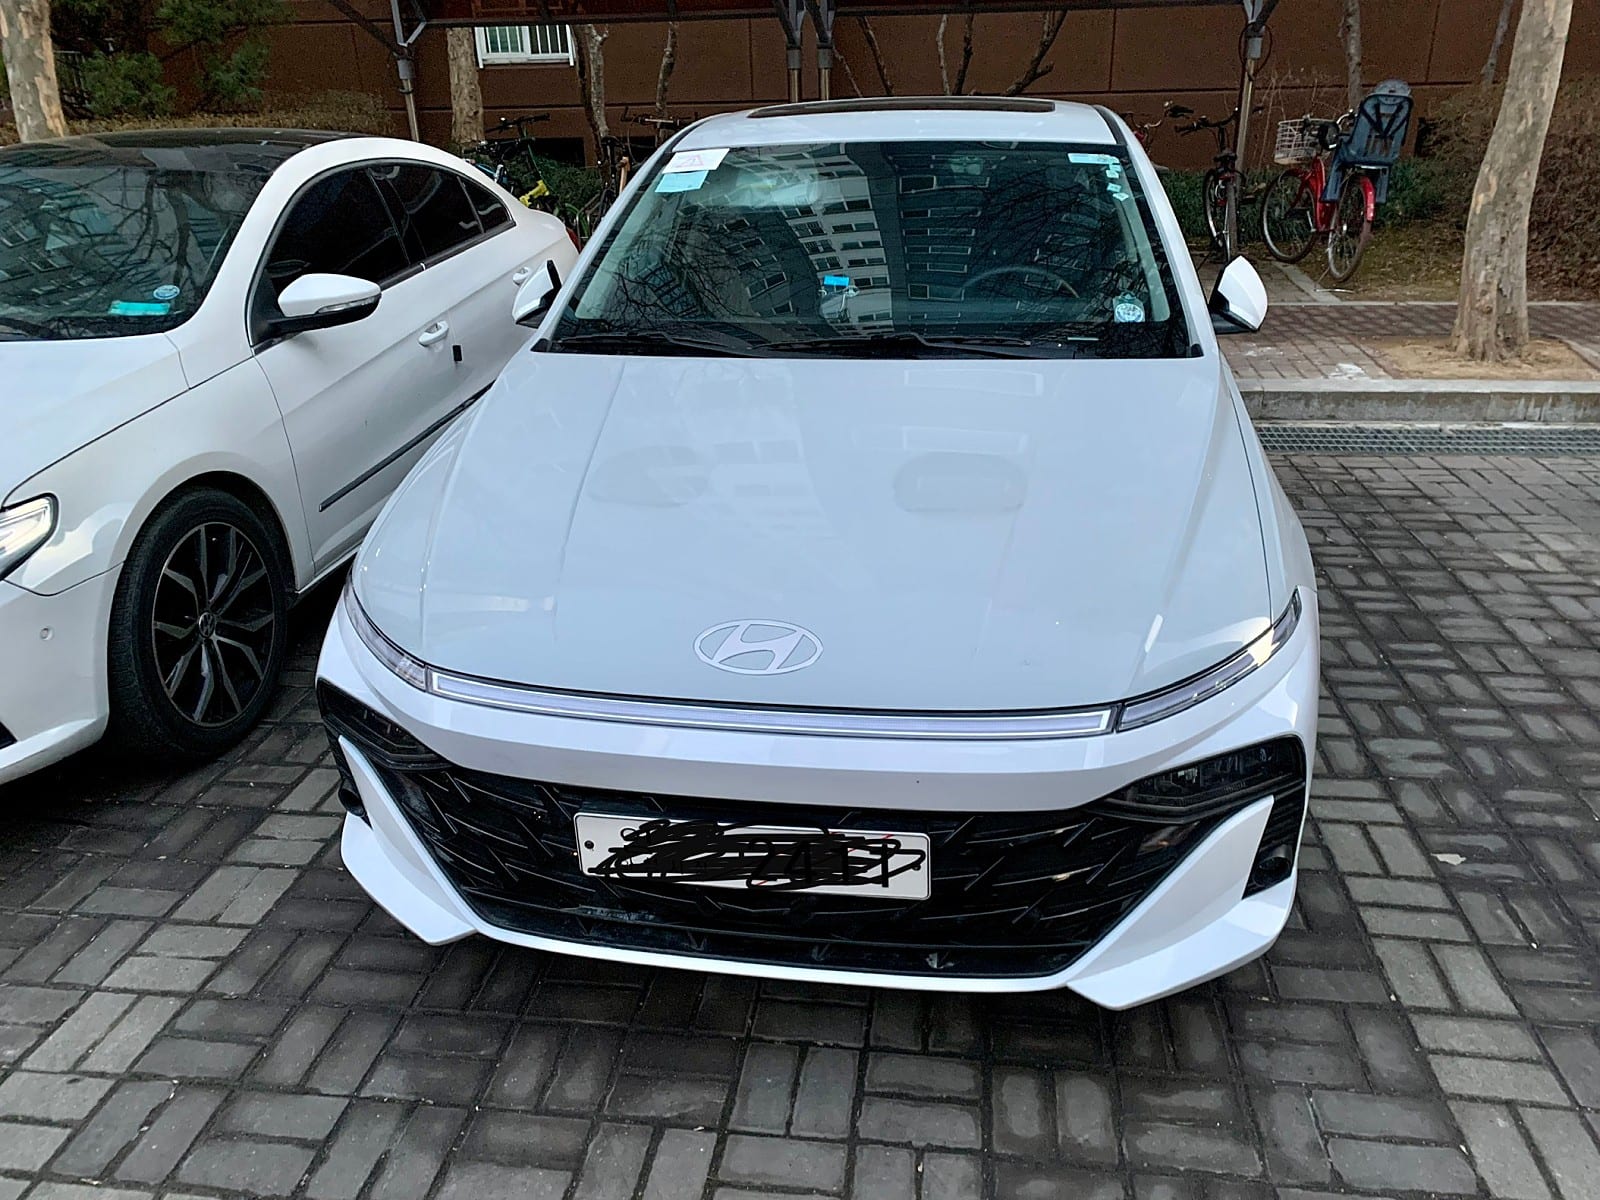 Leaked front view of the new Hyundai Verna posted by a blogger on February 26 (Image Source: Namcha Cafe/ Naver)